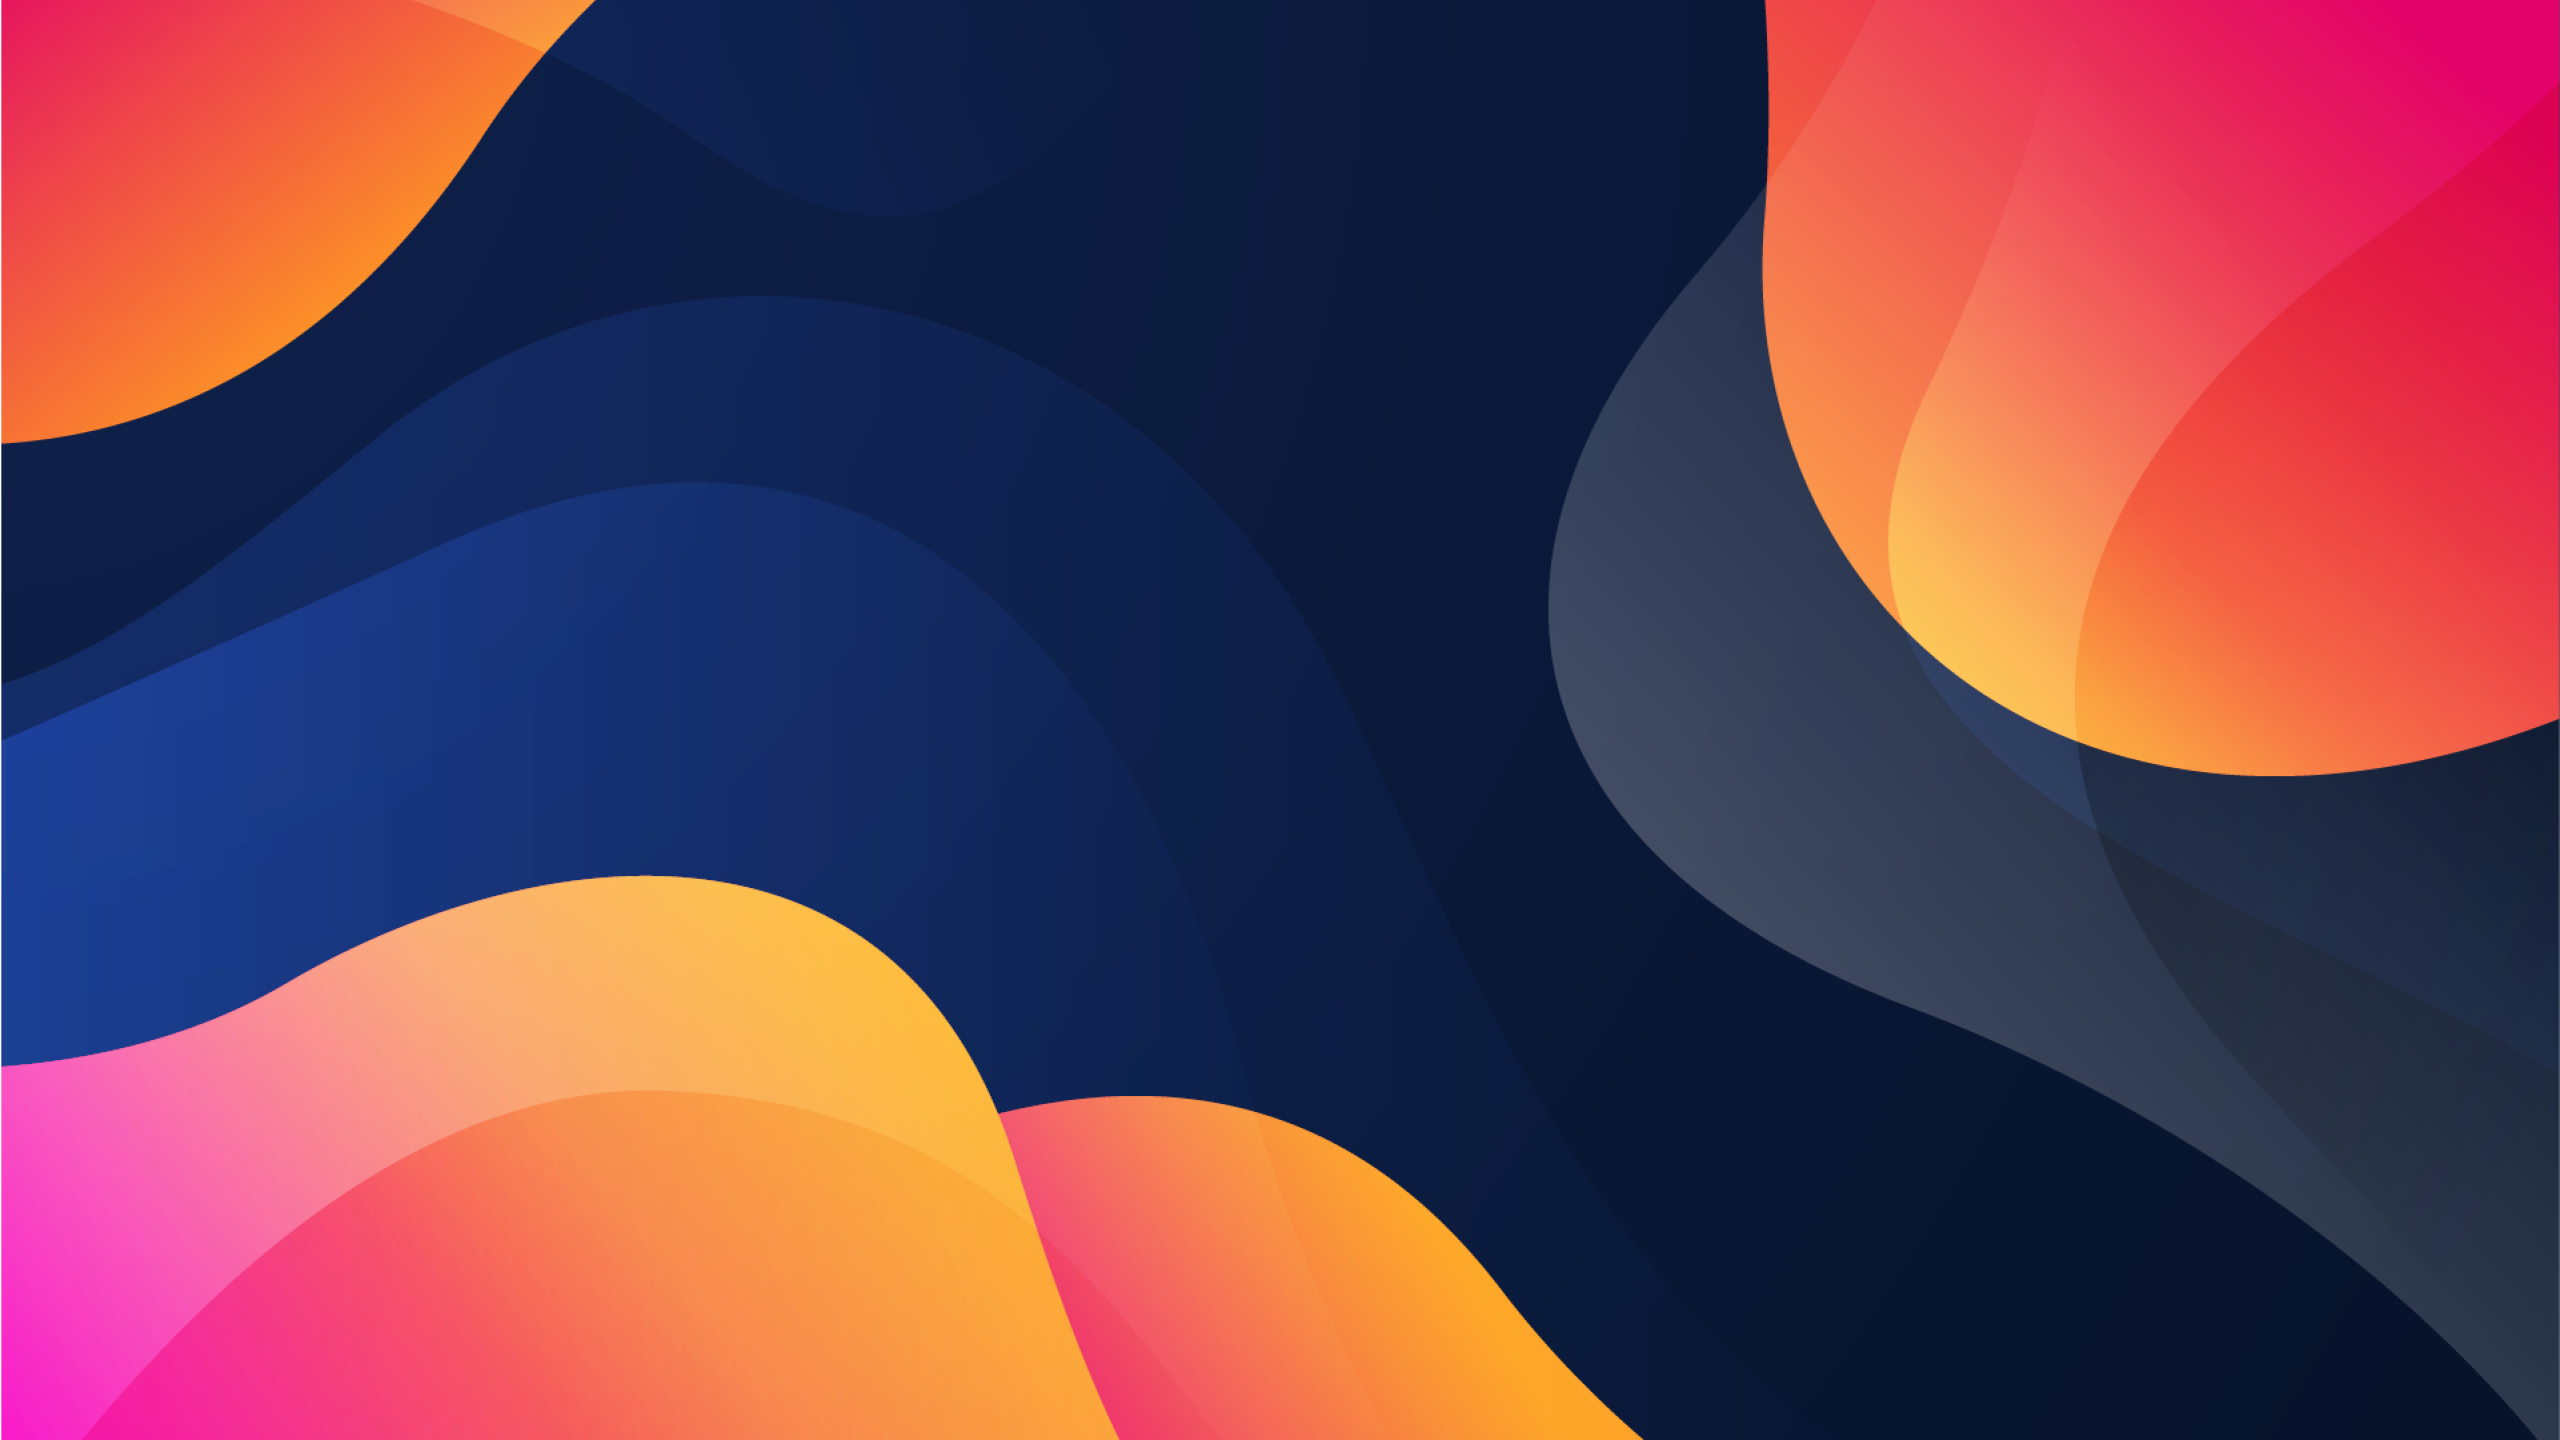 A colorful abstract background with orange, yellow and blue - Abstract, minimalist